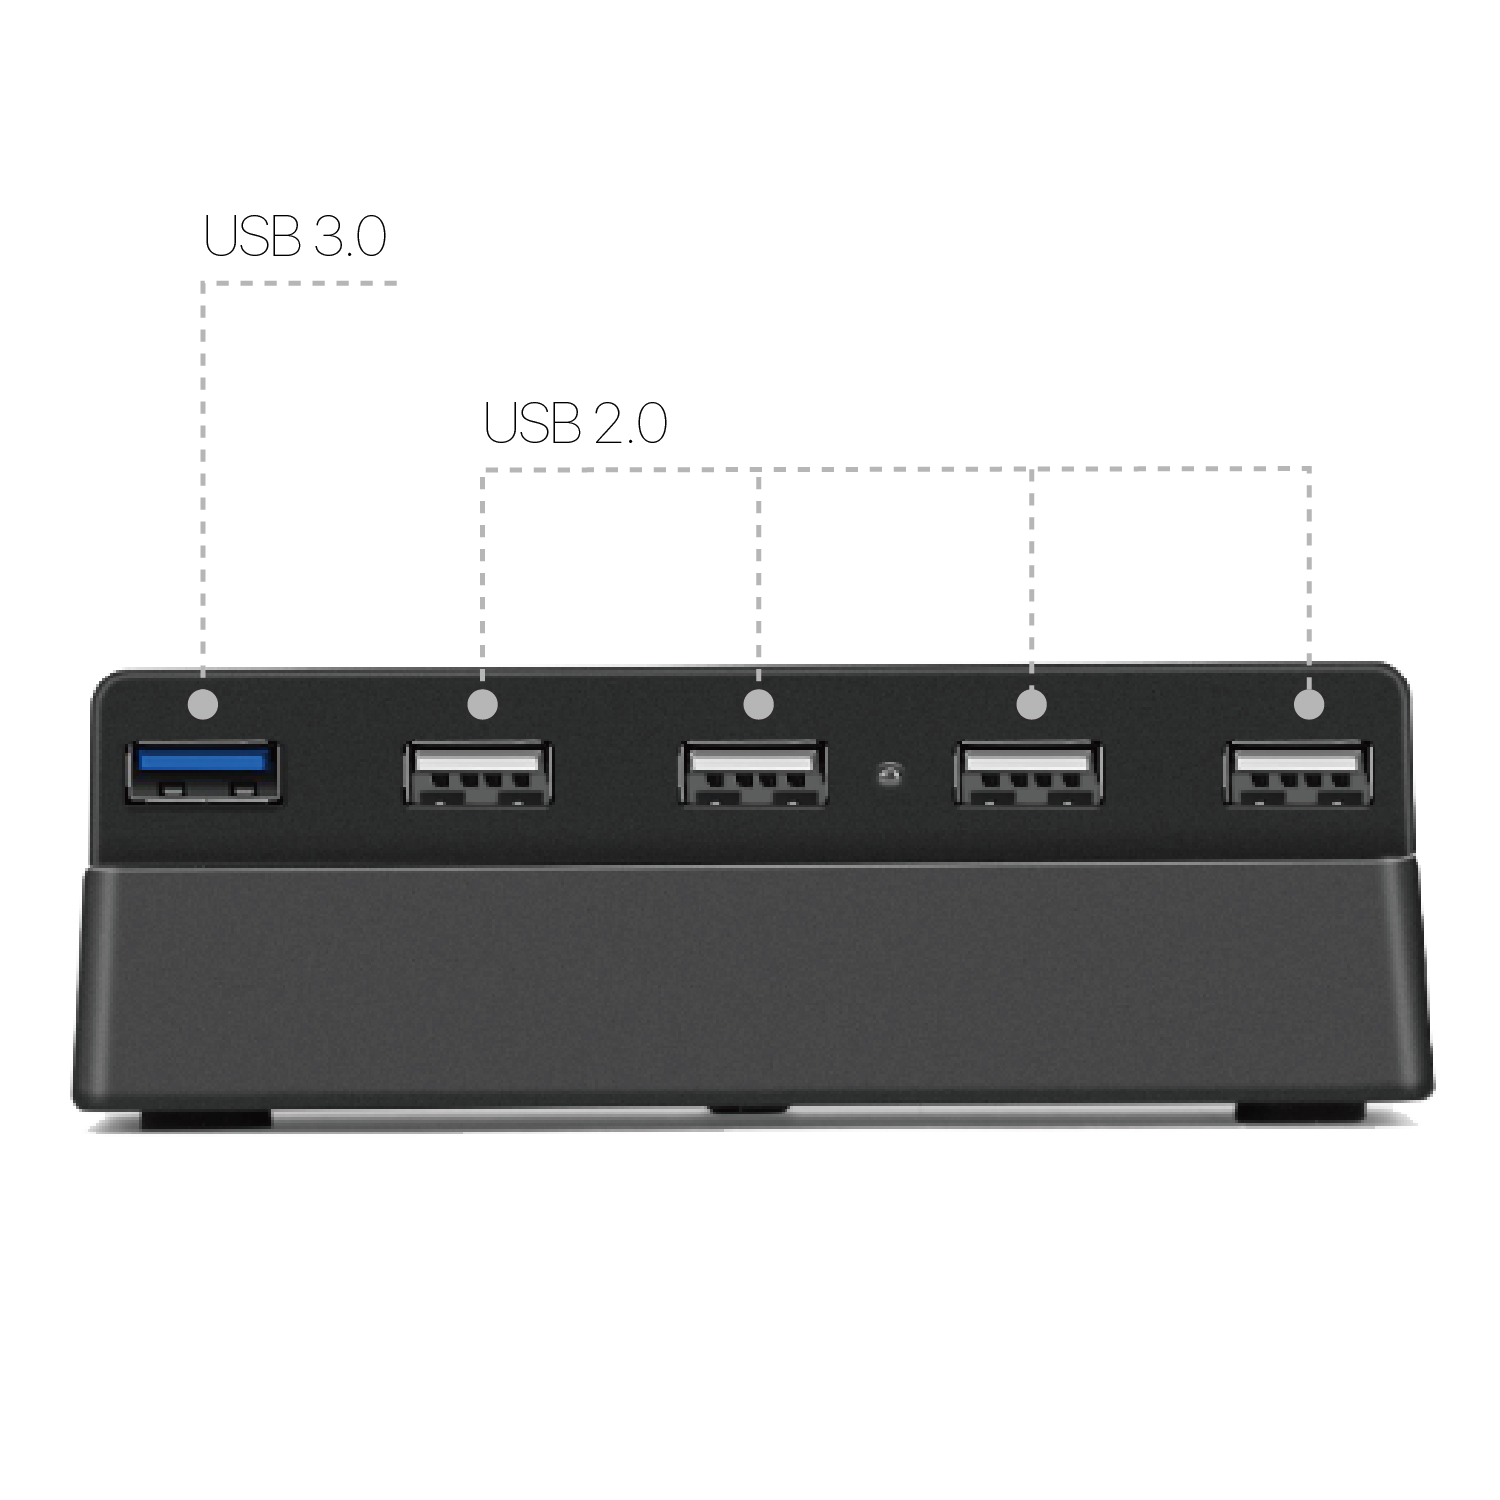 TNP Products 5 Port USB Hub for PS4 Slim Edition - USB 3.0 / 2.0 High Speed Adapter Accessories Expansion Hub Connector Splitter Expander for